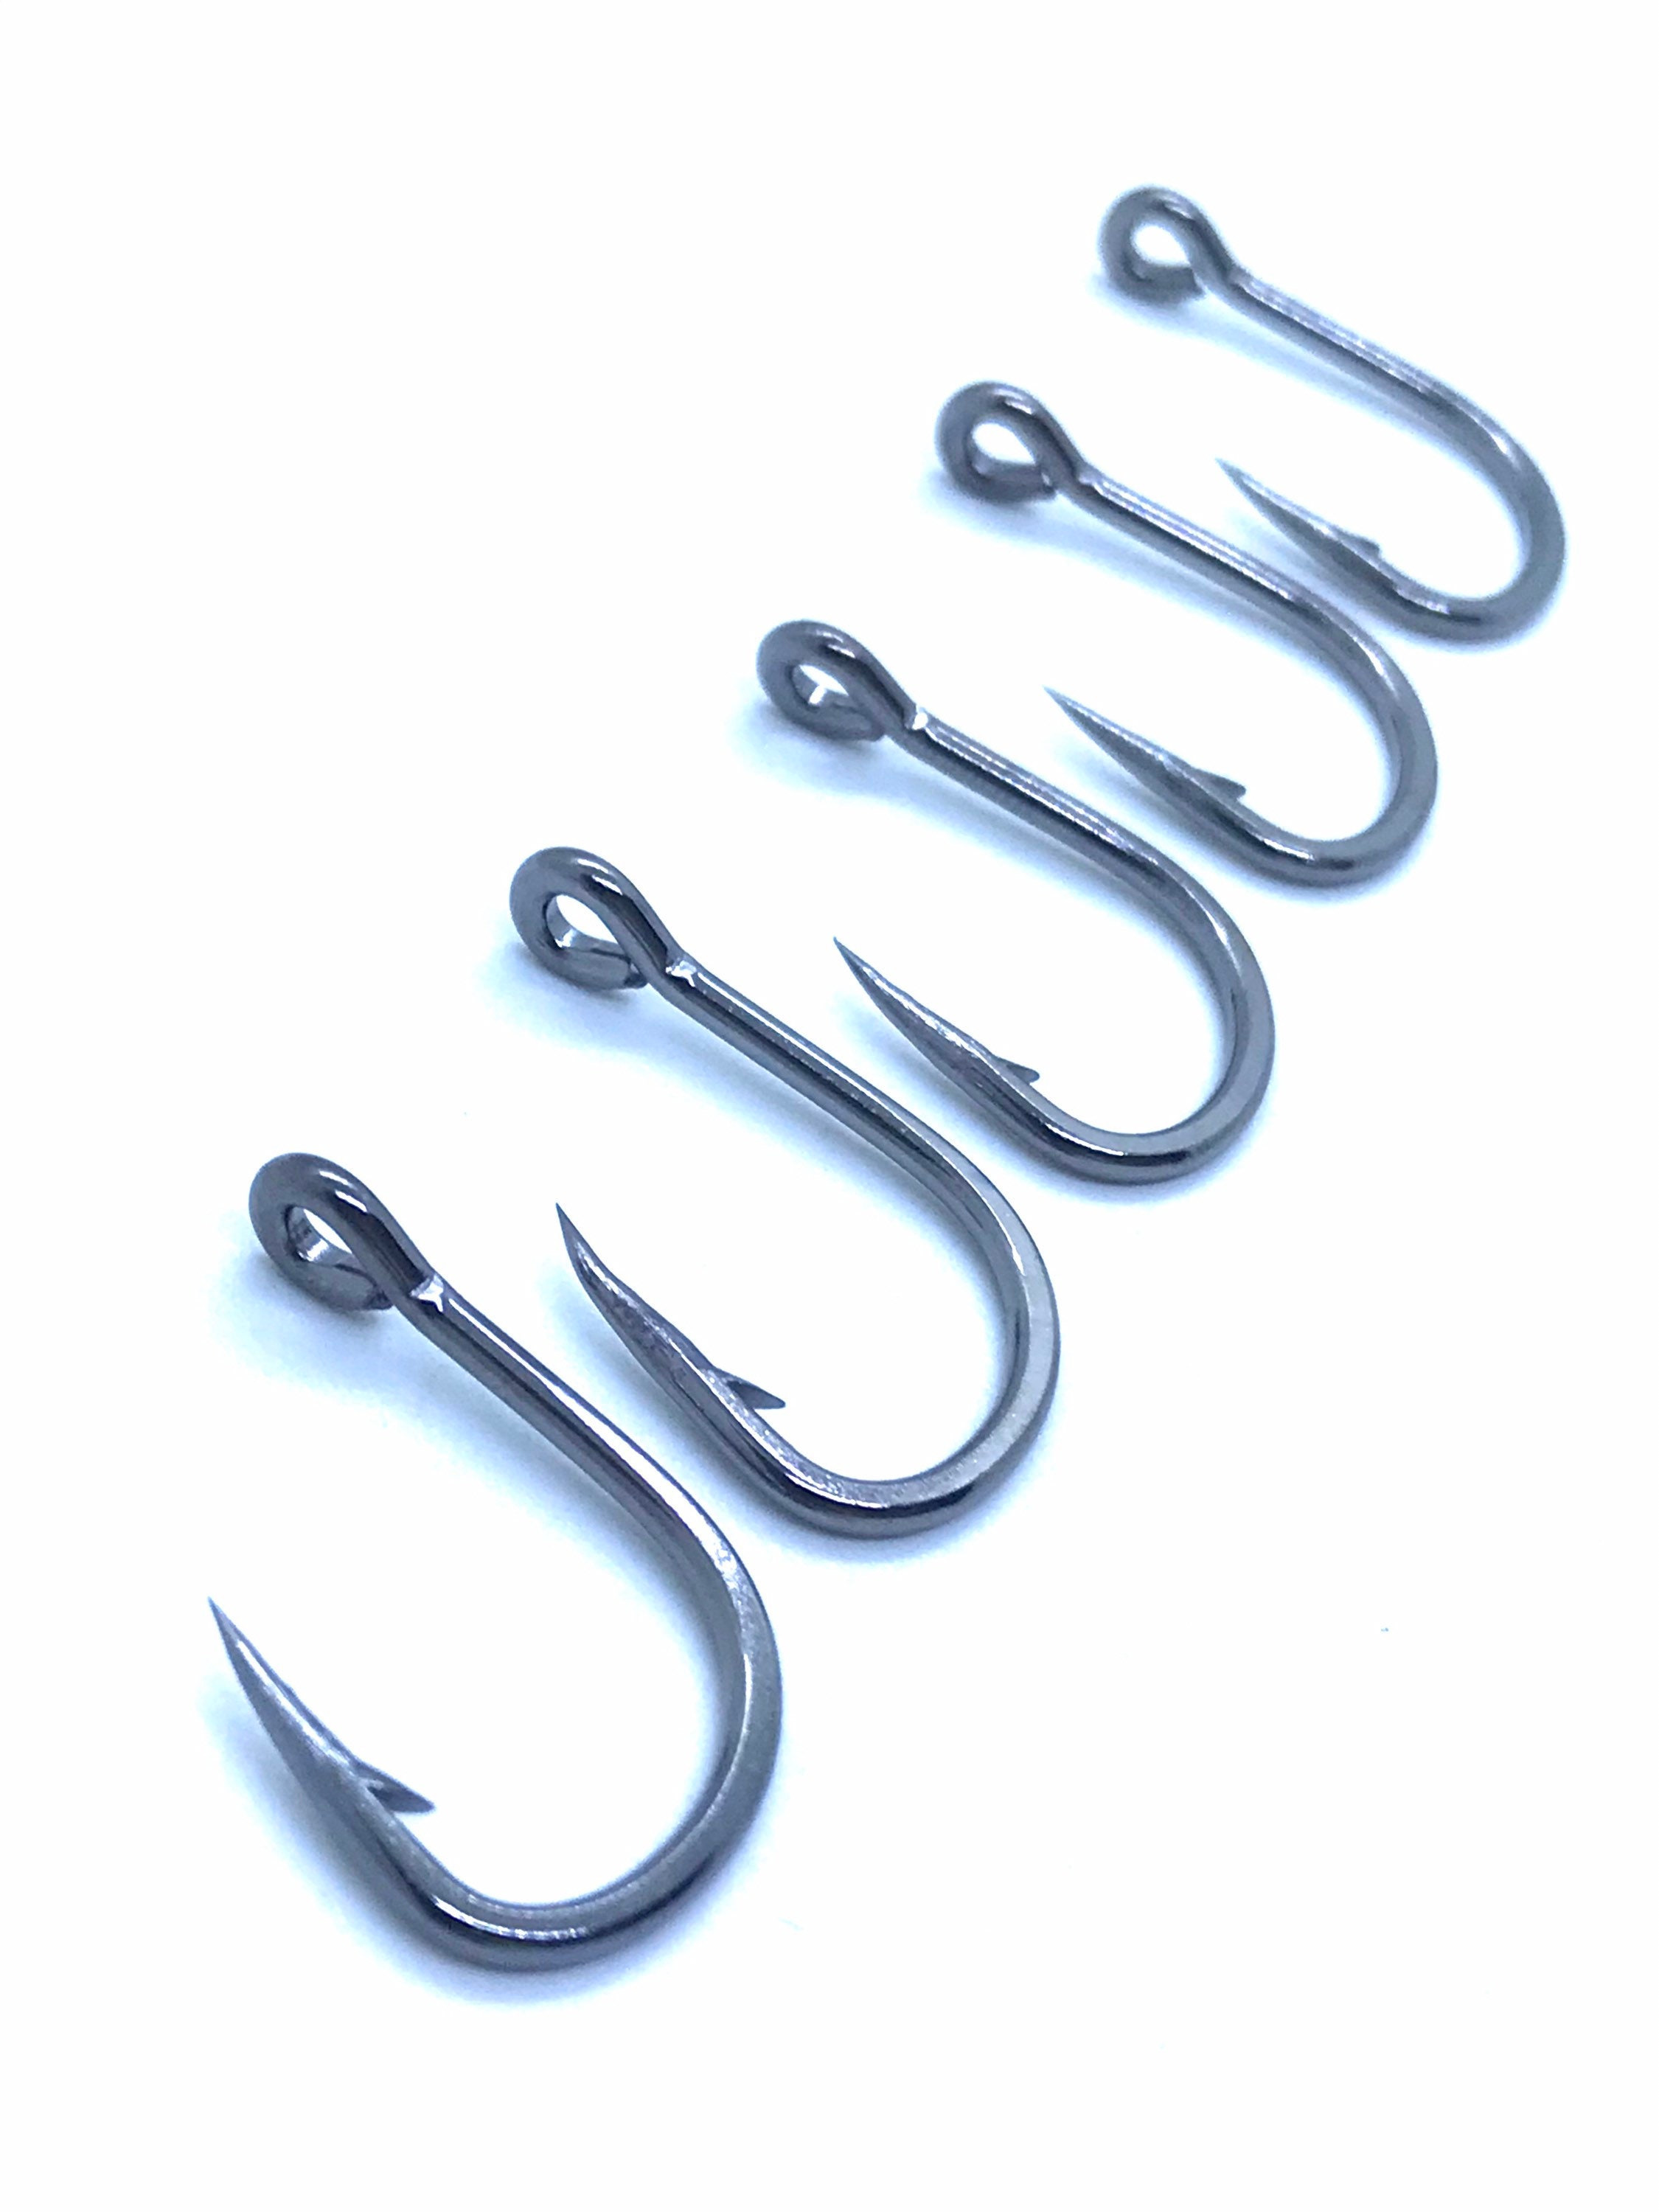 Made to Order Big Eye Fishing Hooks / Stainless Steel / Salt-fresh Water /  XL Strength / SIZE : 4/0 100x or 200x Hooks -  Canada